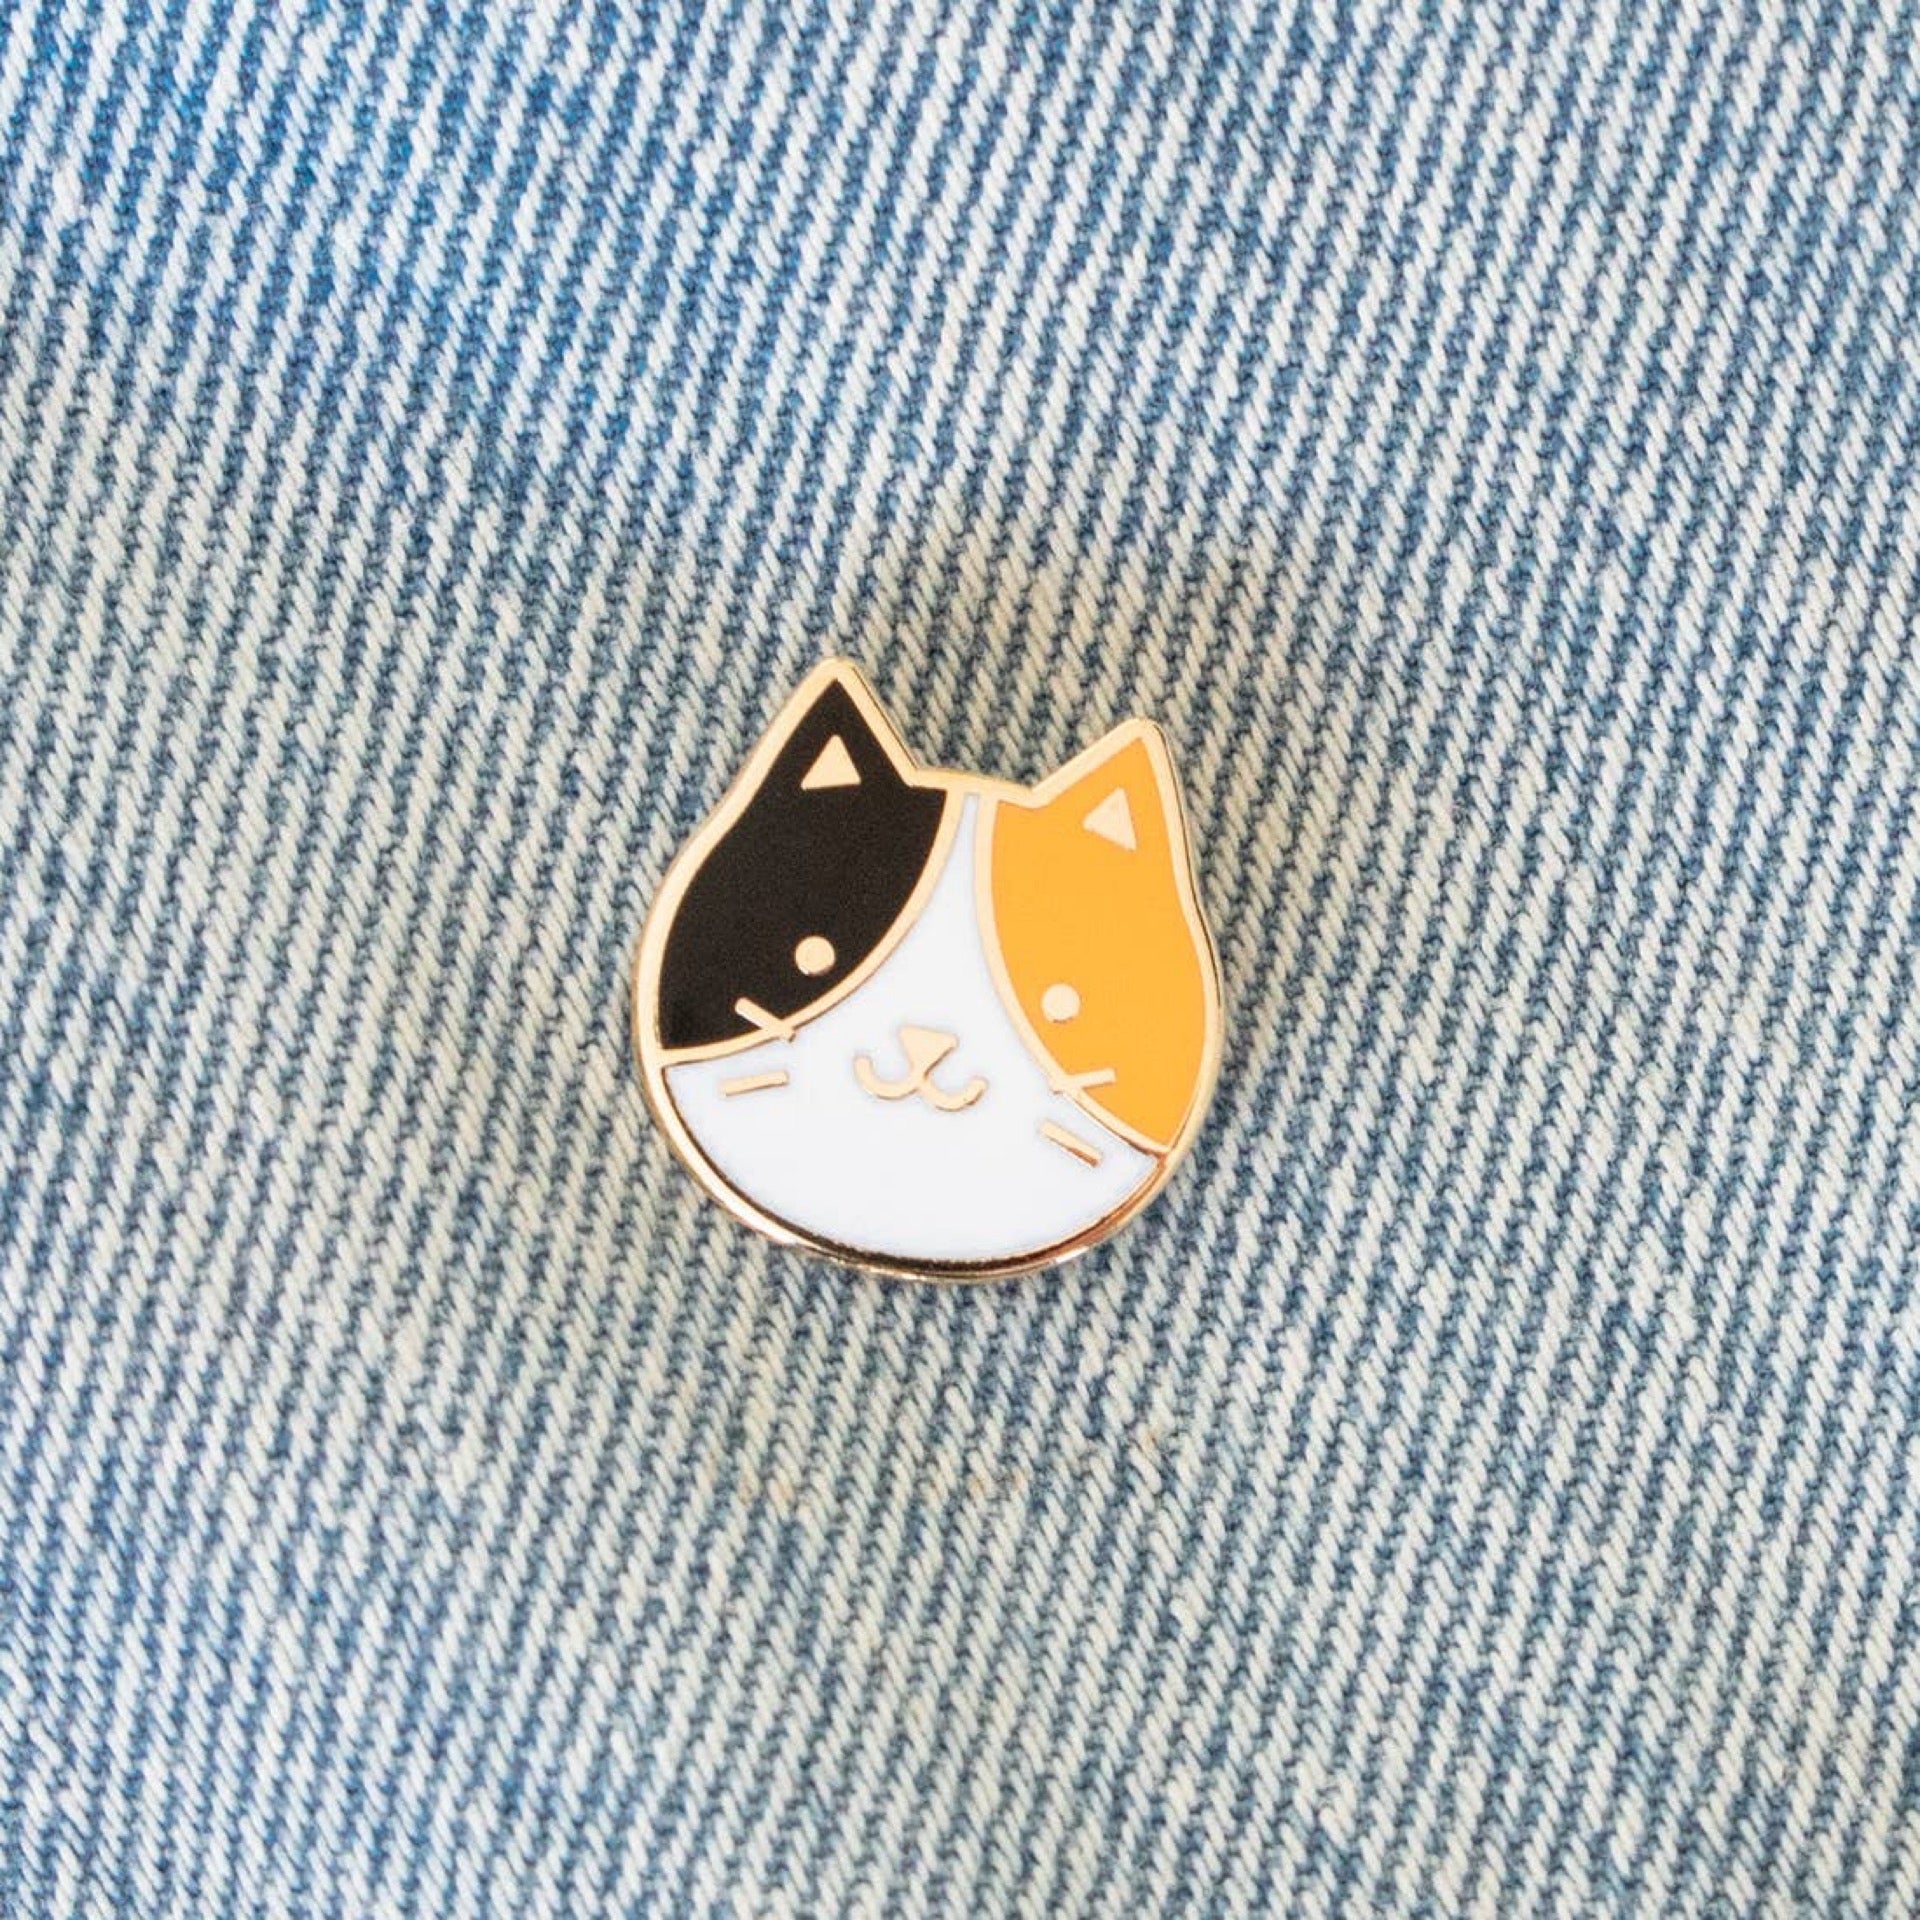 Pin on Kitty cats